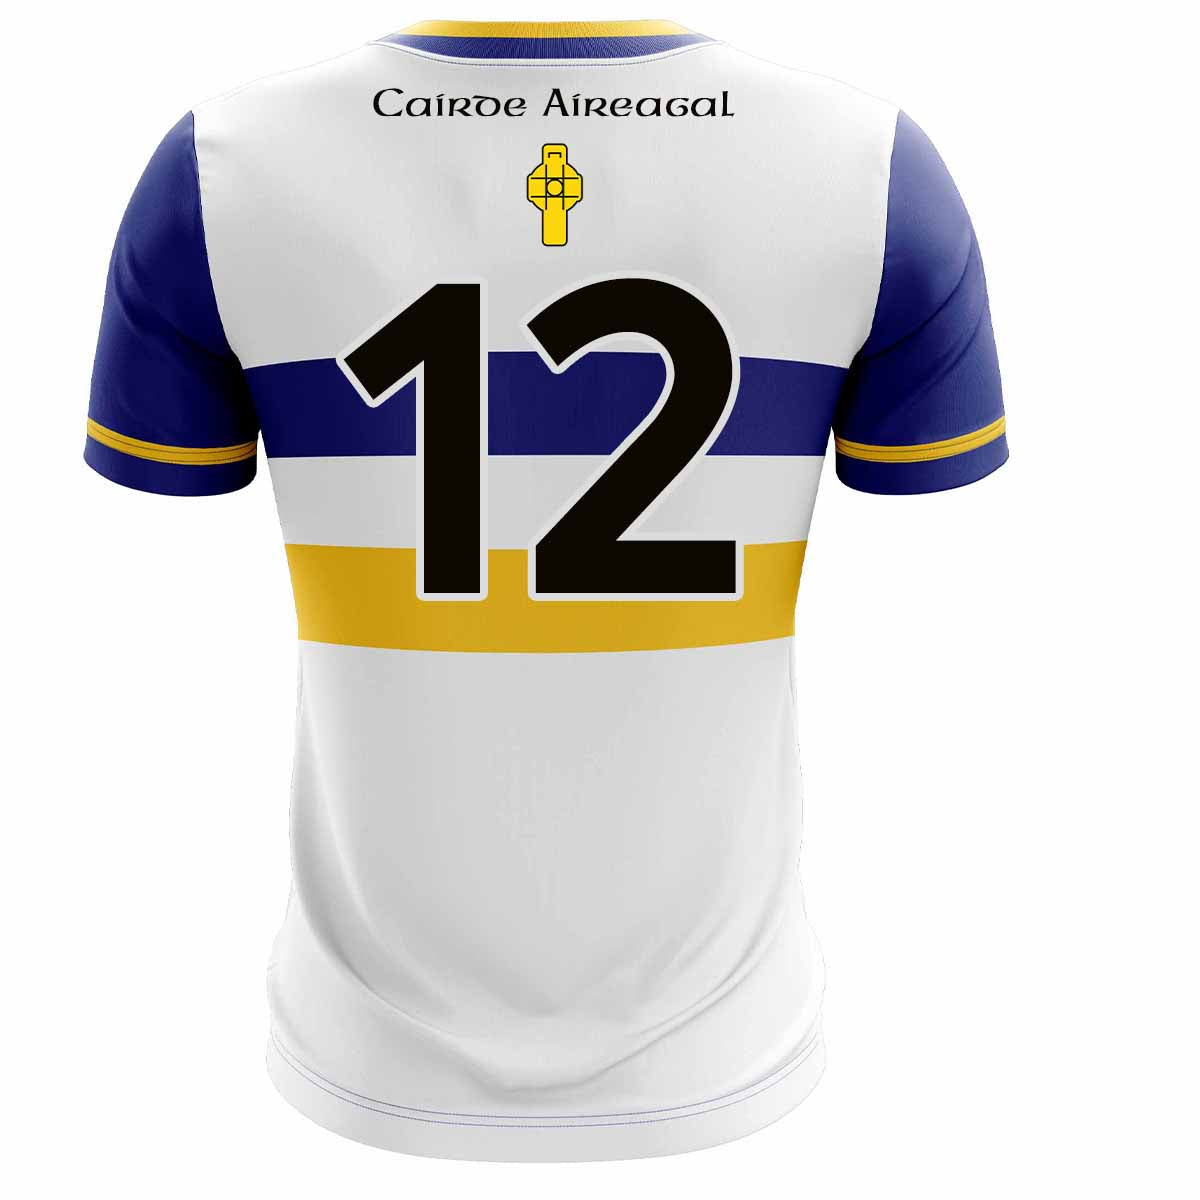 Mc Keever Errigal Ciaran GAA Numbered Home Jersey - Youth - White/Royal